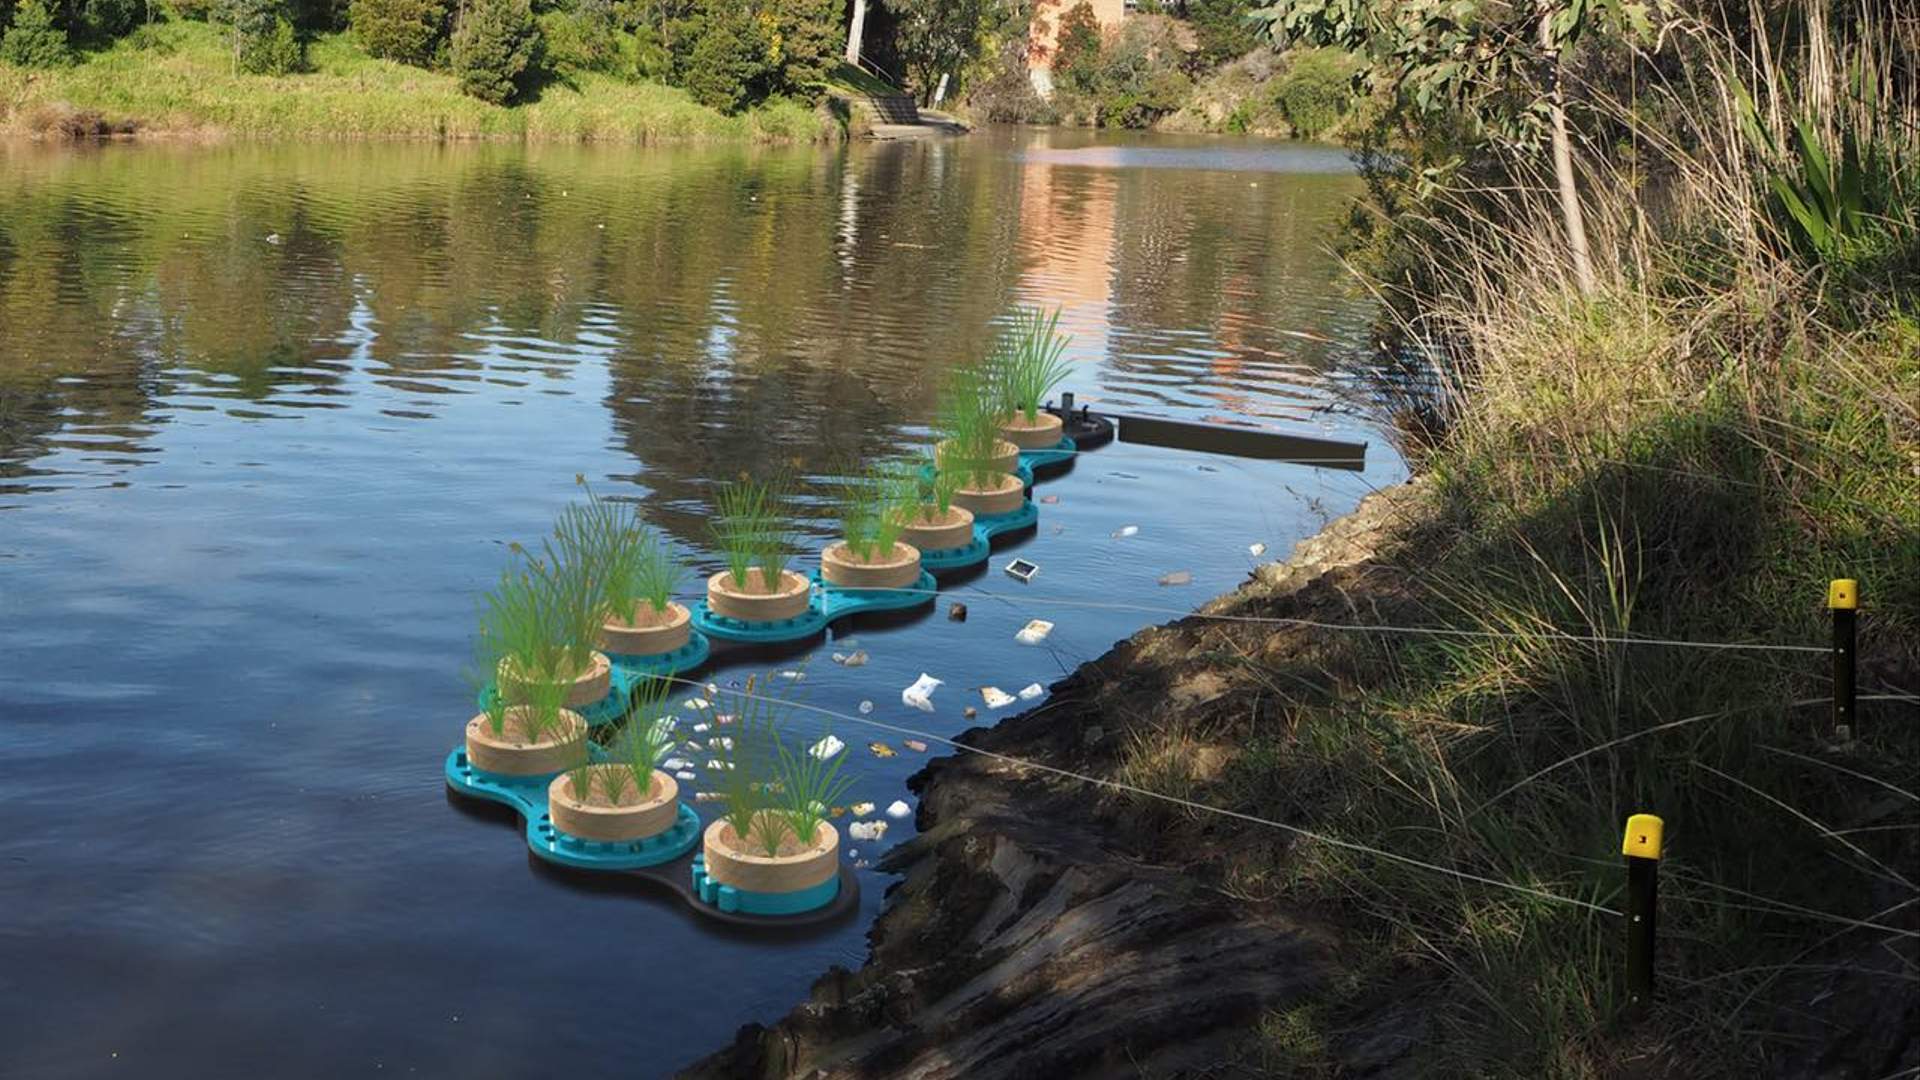 These Floating Planters Help Trap and Remove Rubbish from